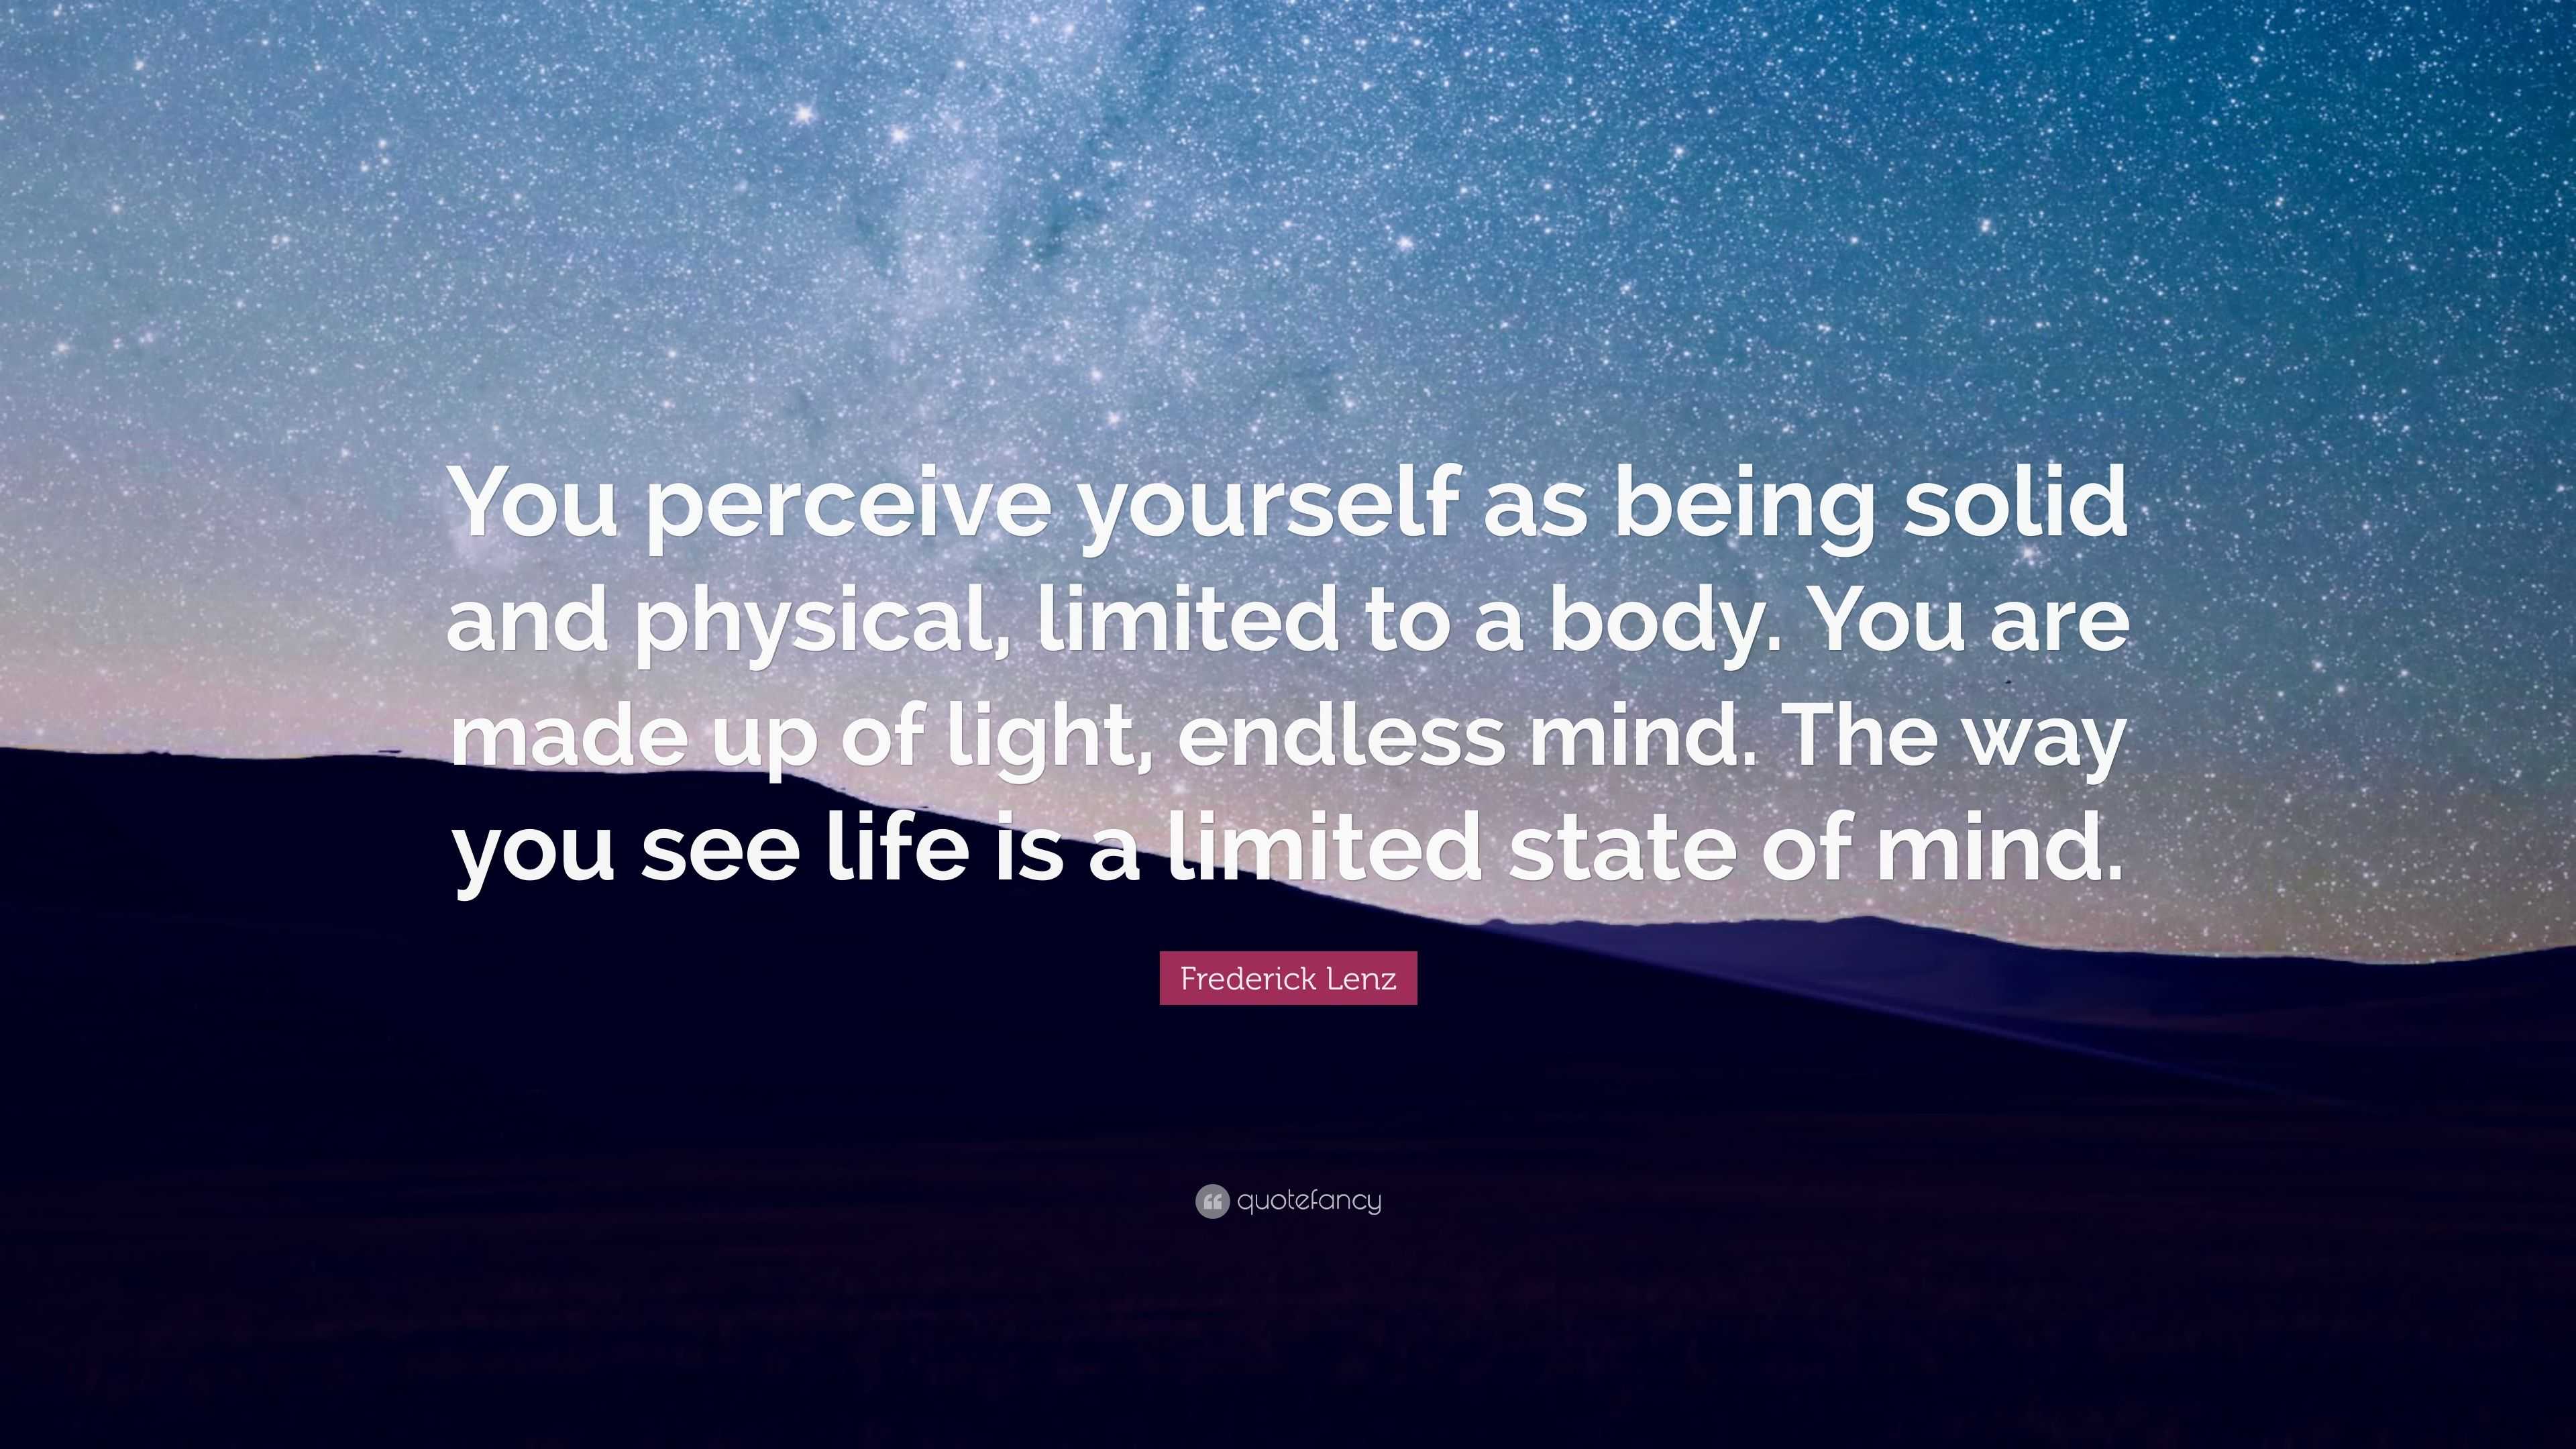 Frederick Lenz Quote: “You perceive yourself as being solid and ...